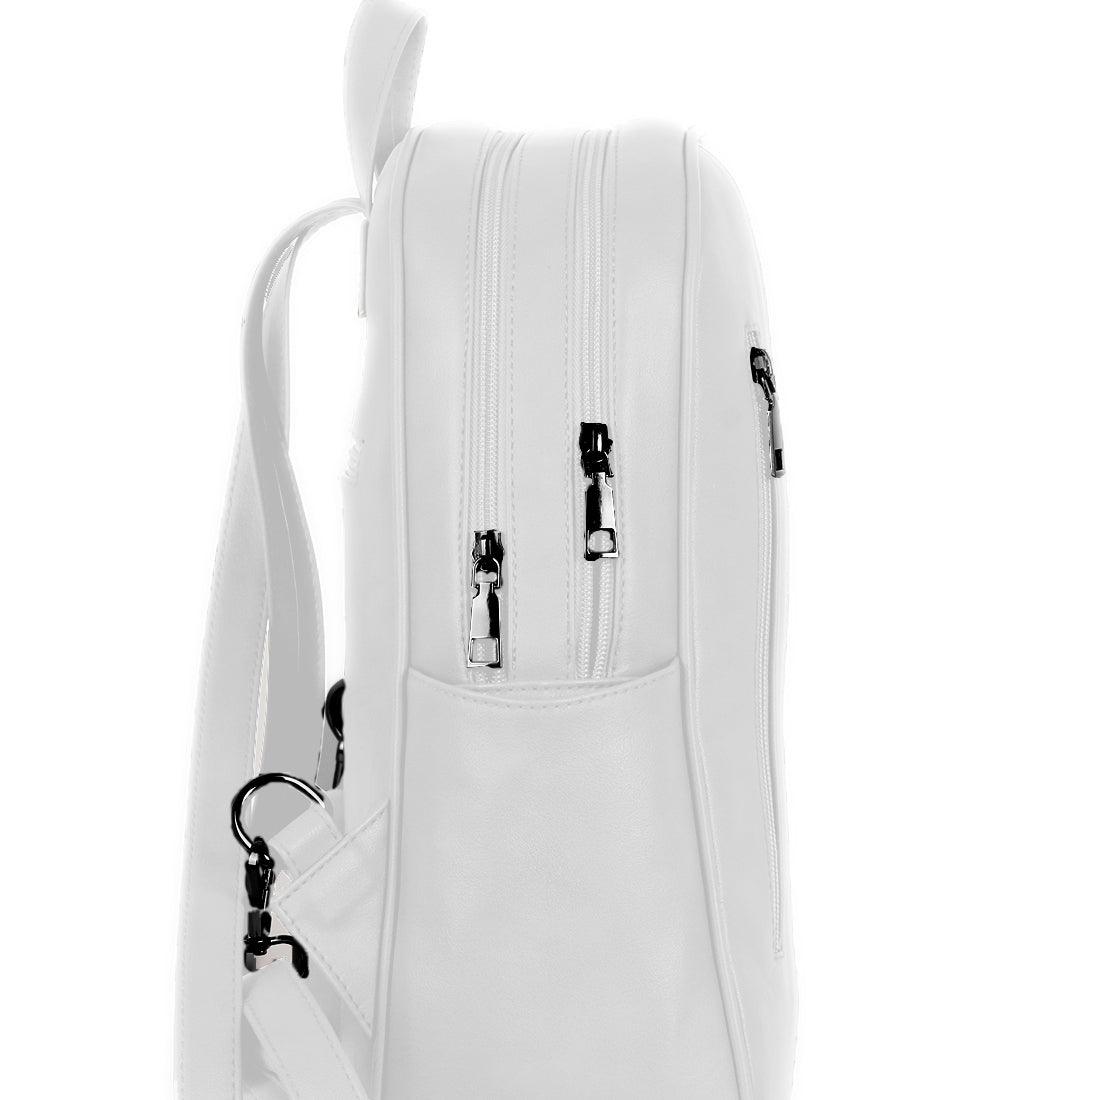 White Mixed Backpack White Floral - CANVAEGYPT